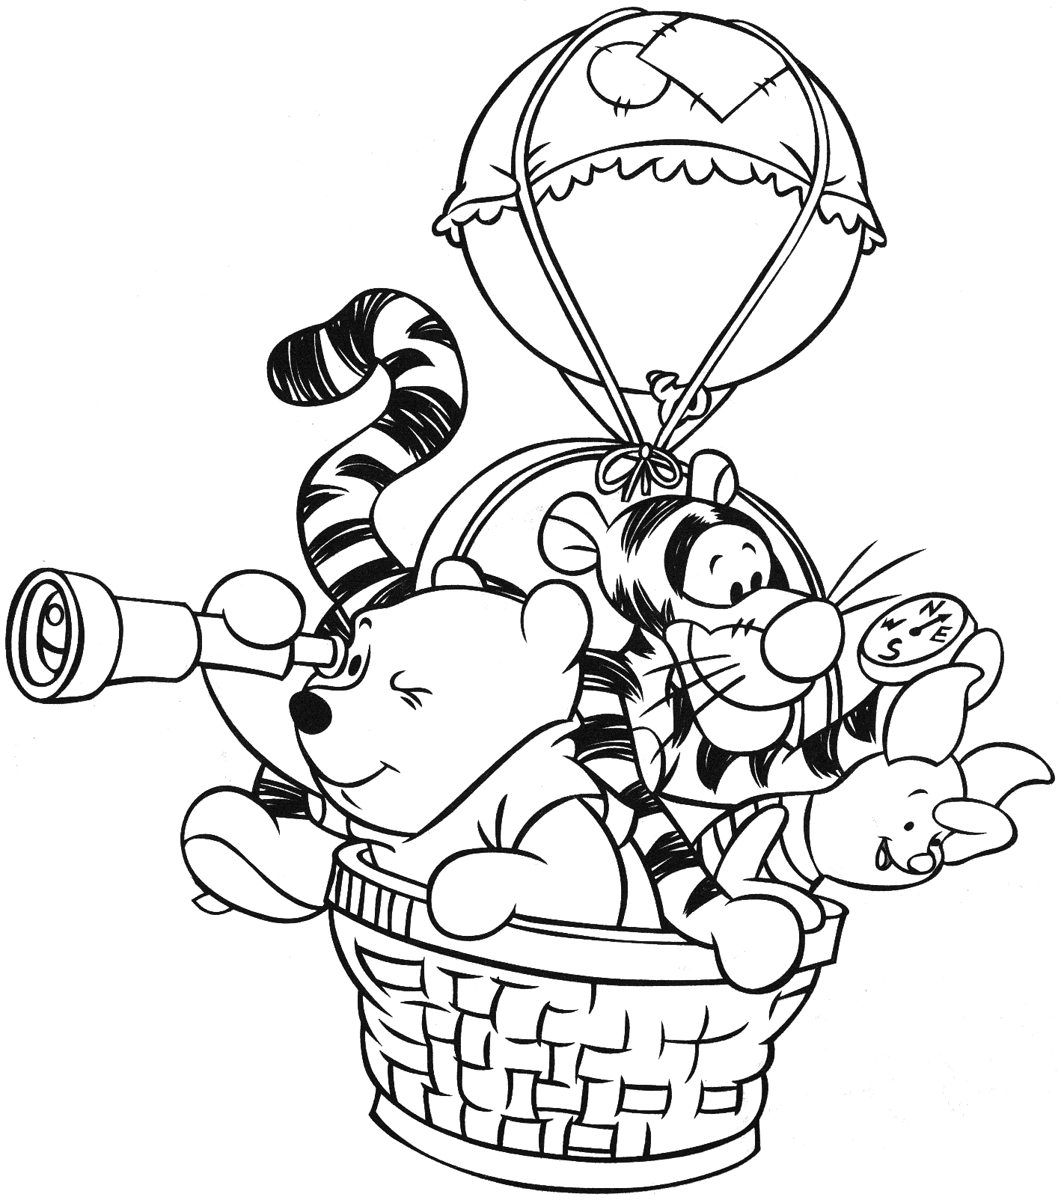 Baby Winnie the Pooh And friends Coloring Page